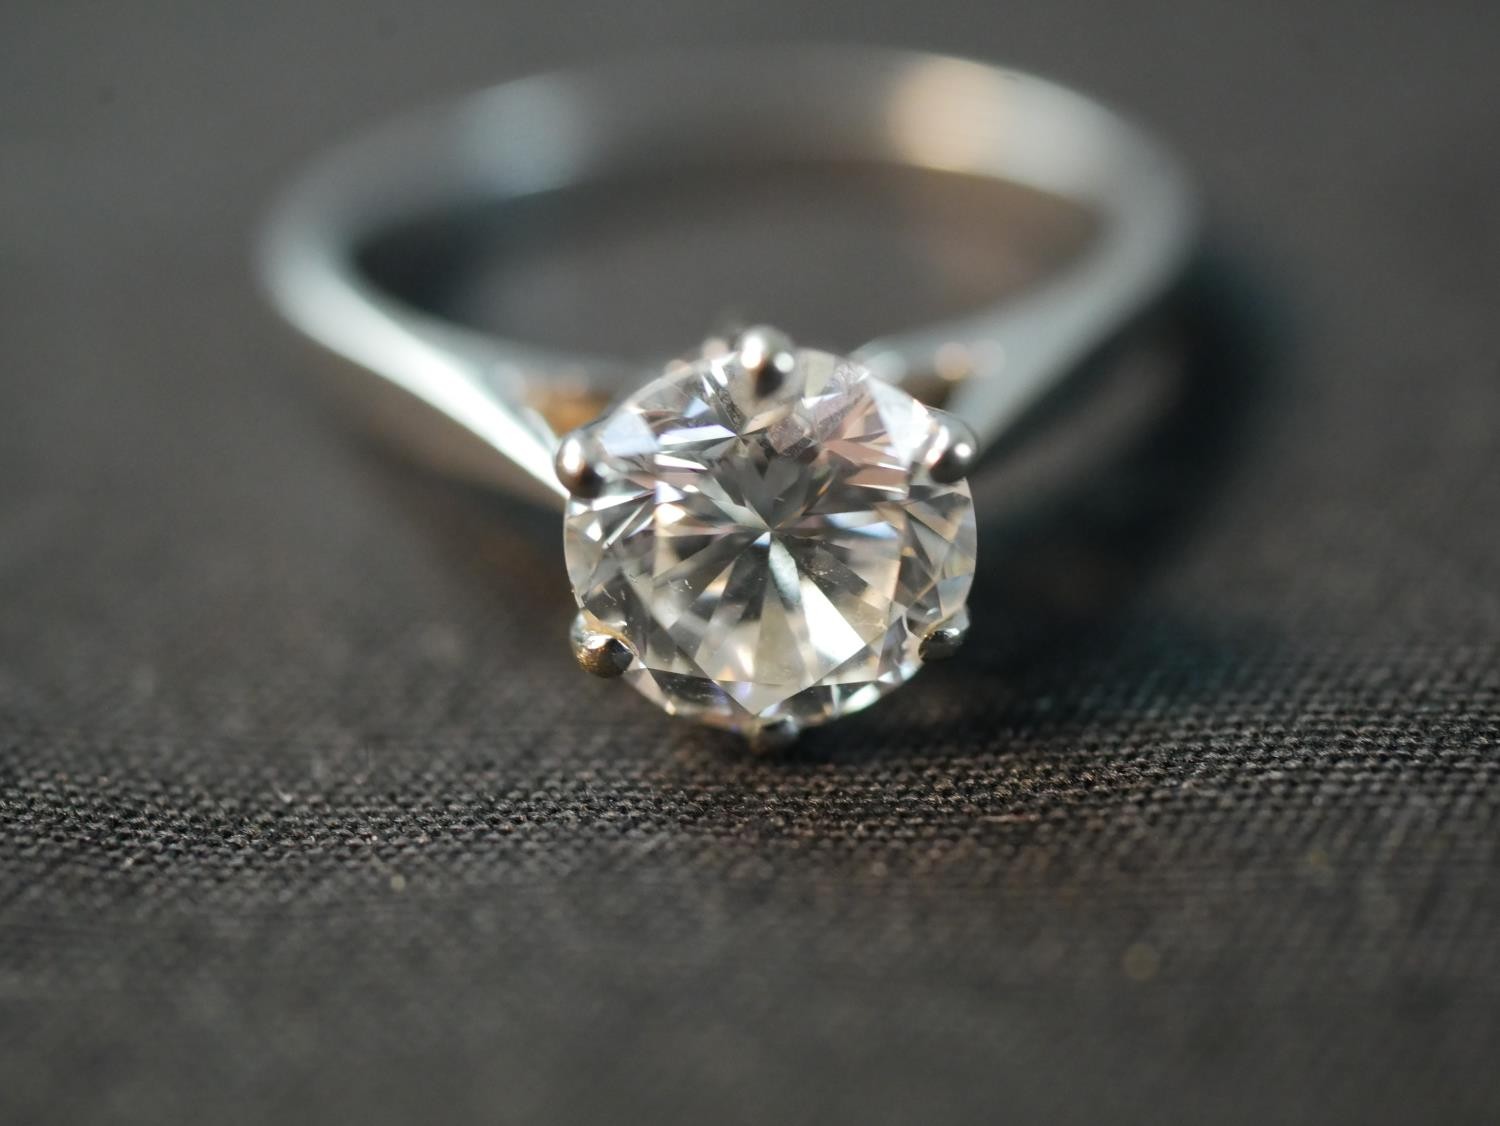 An 18 carat white gold solitaire diamond ring, set with a round old cut diamond in an open back - Image 7 of 7